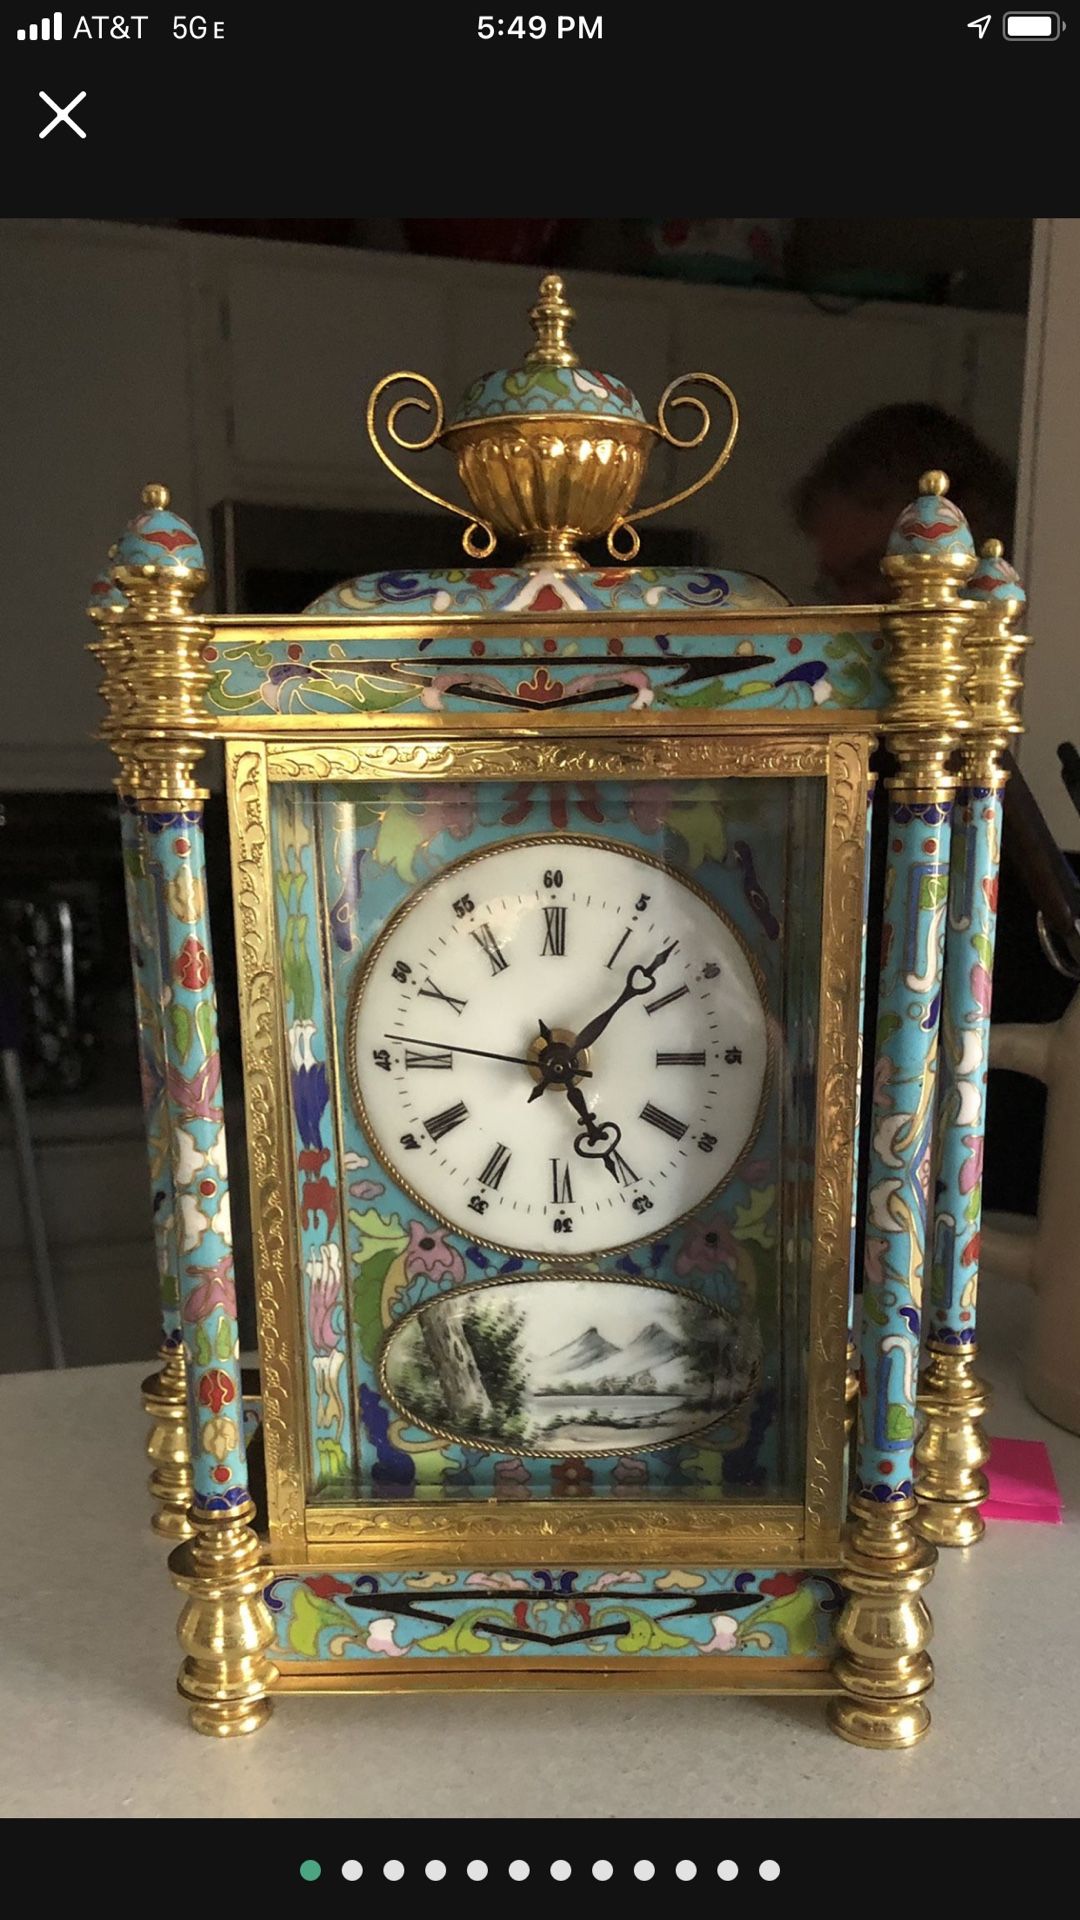 20th Century Chinese cloisonné French style mantle clock (see description)